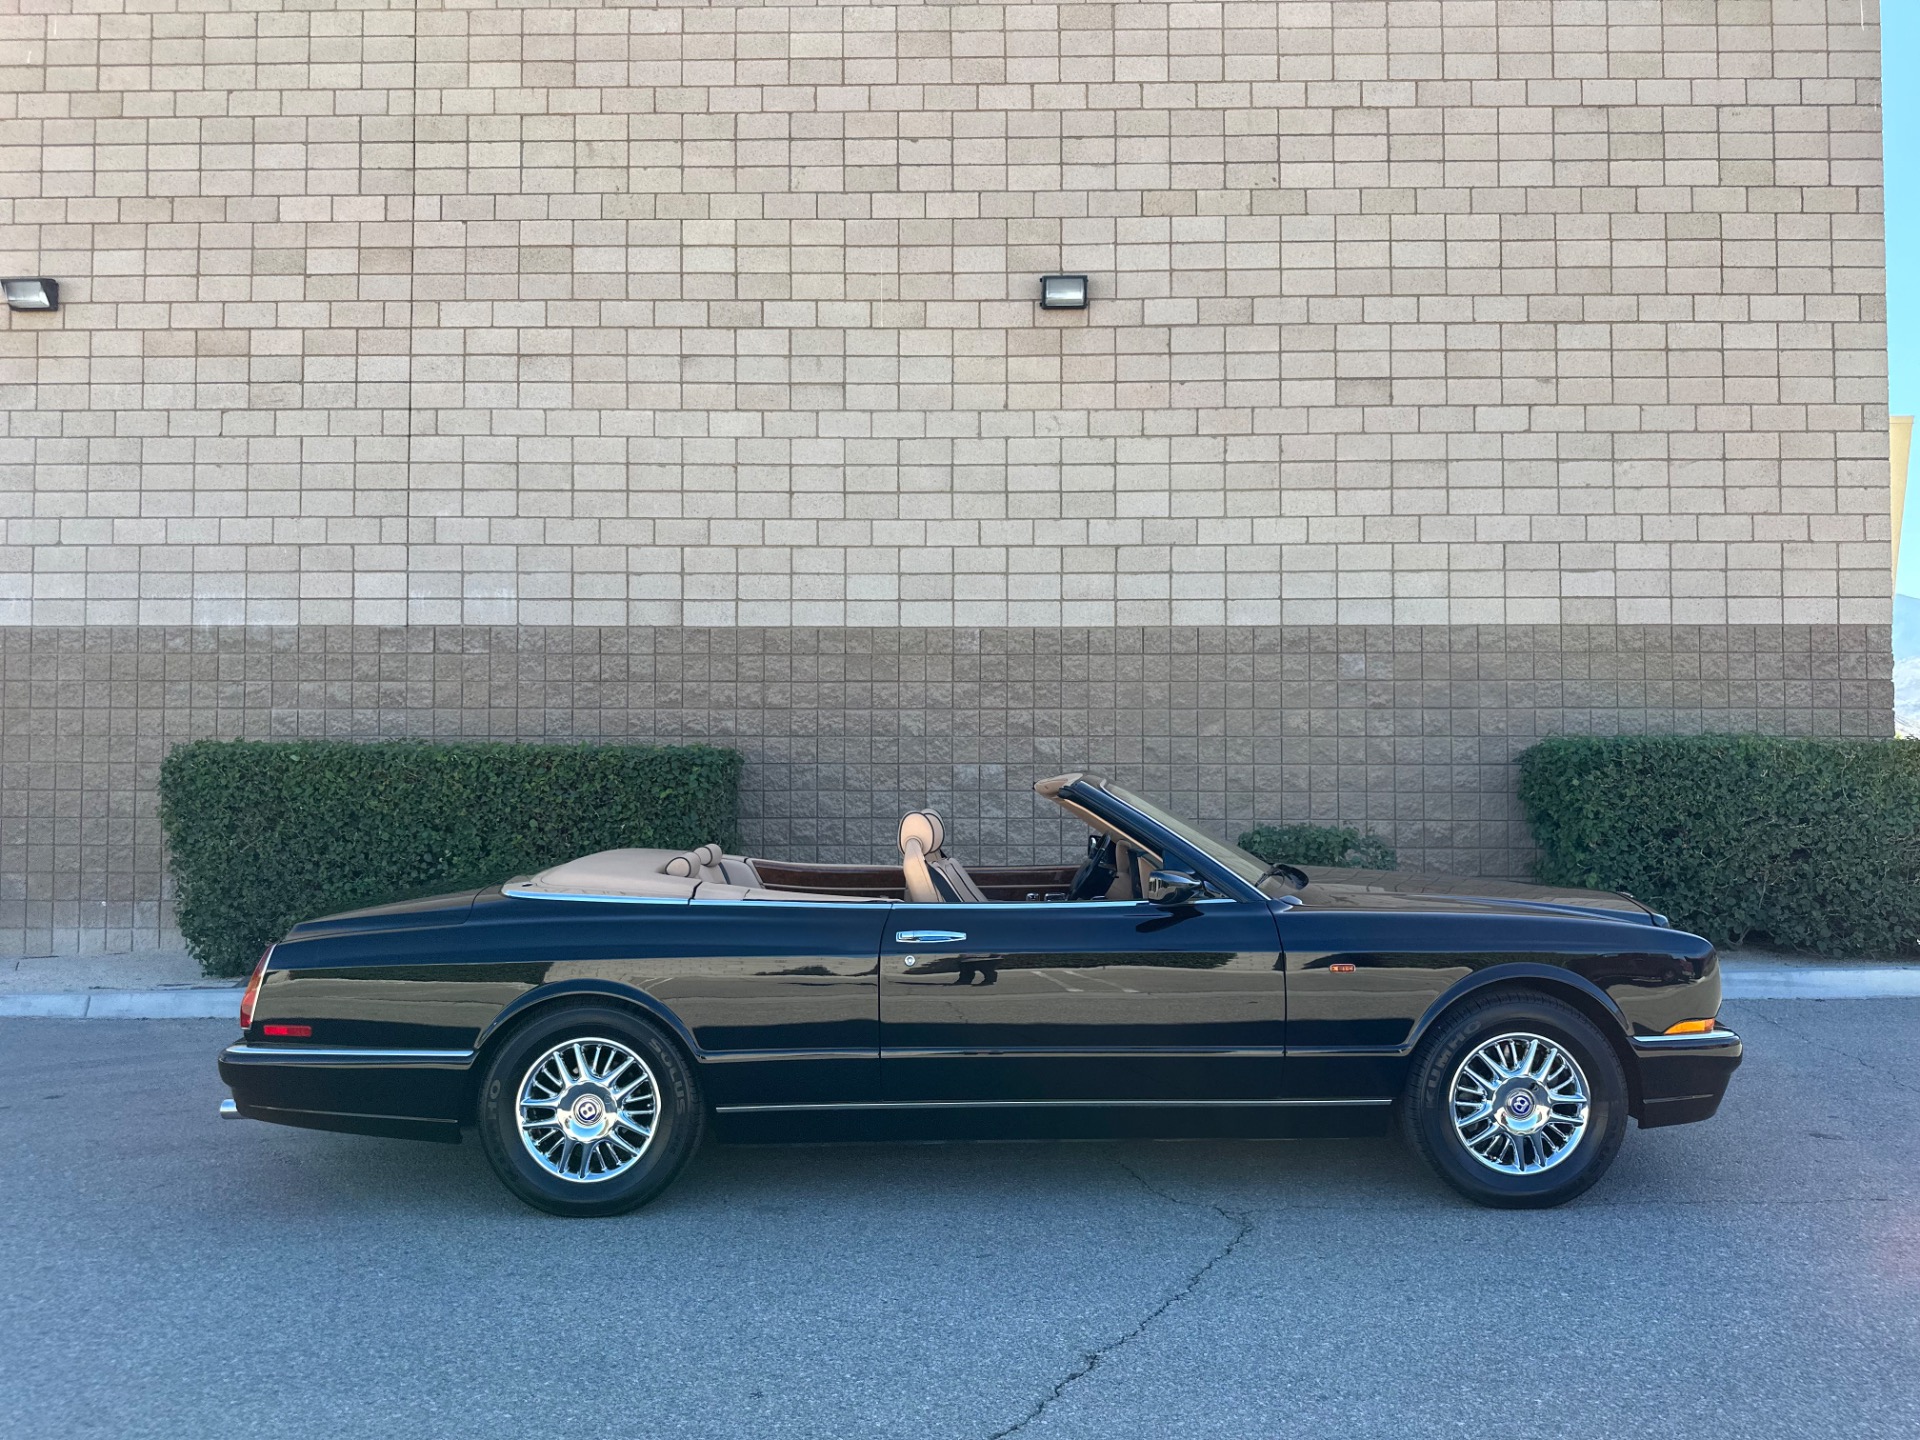 2001 Bentley Azure Stock # BE139 for sale near Palm Springs, CA 